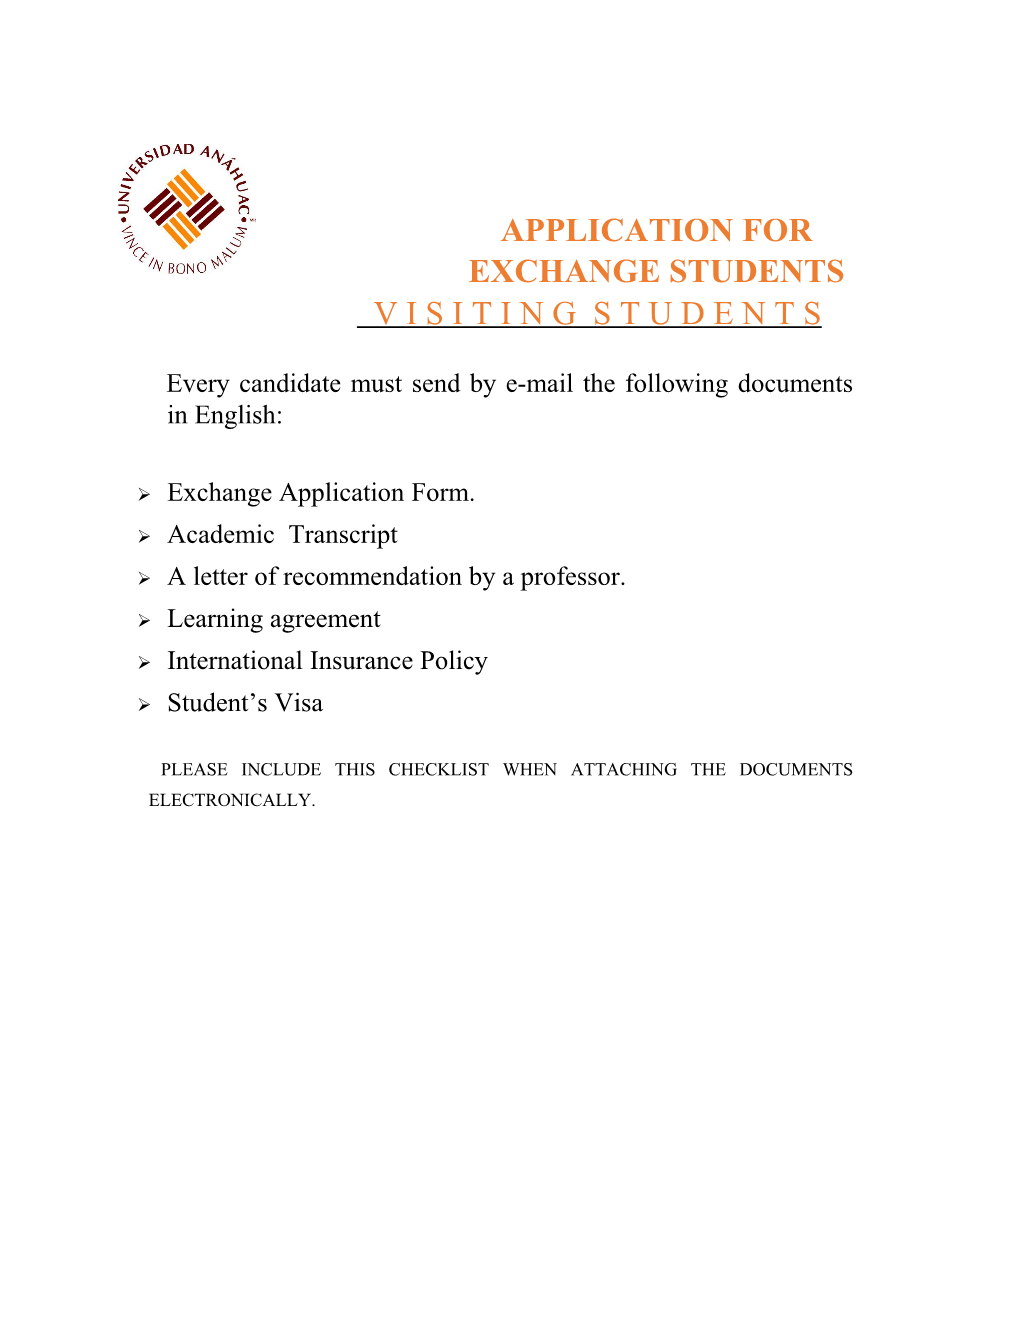 Application for Exchange Students